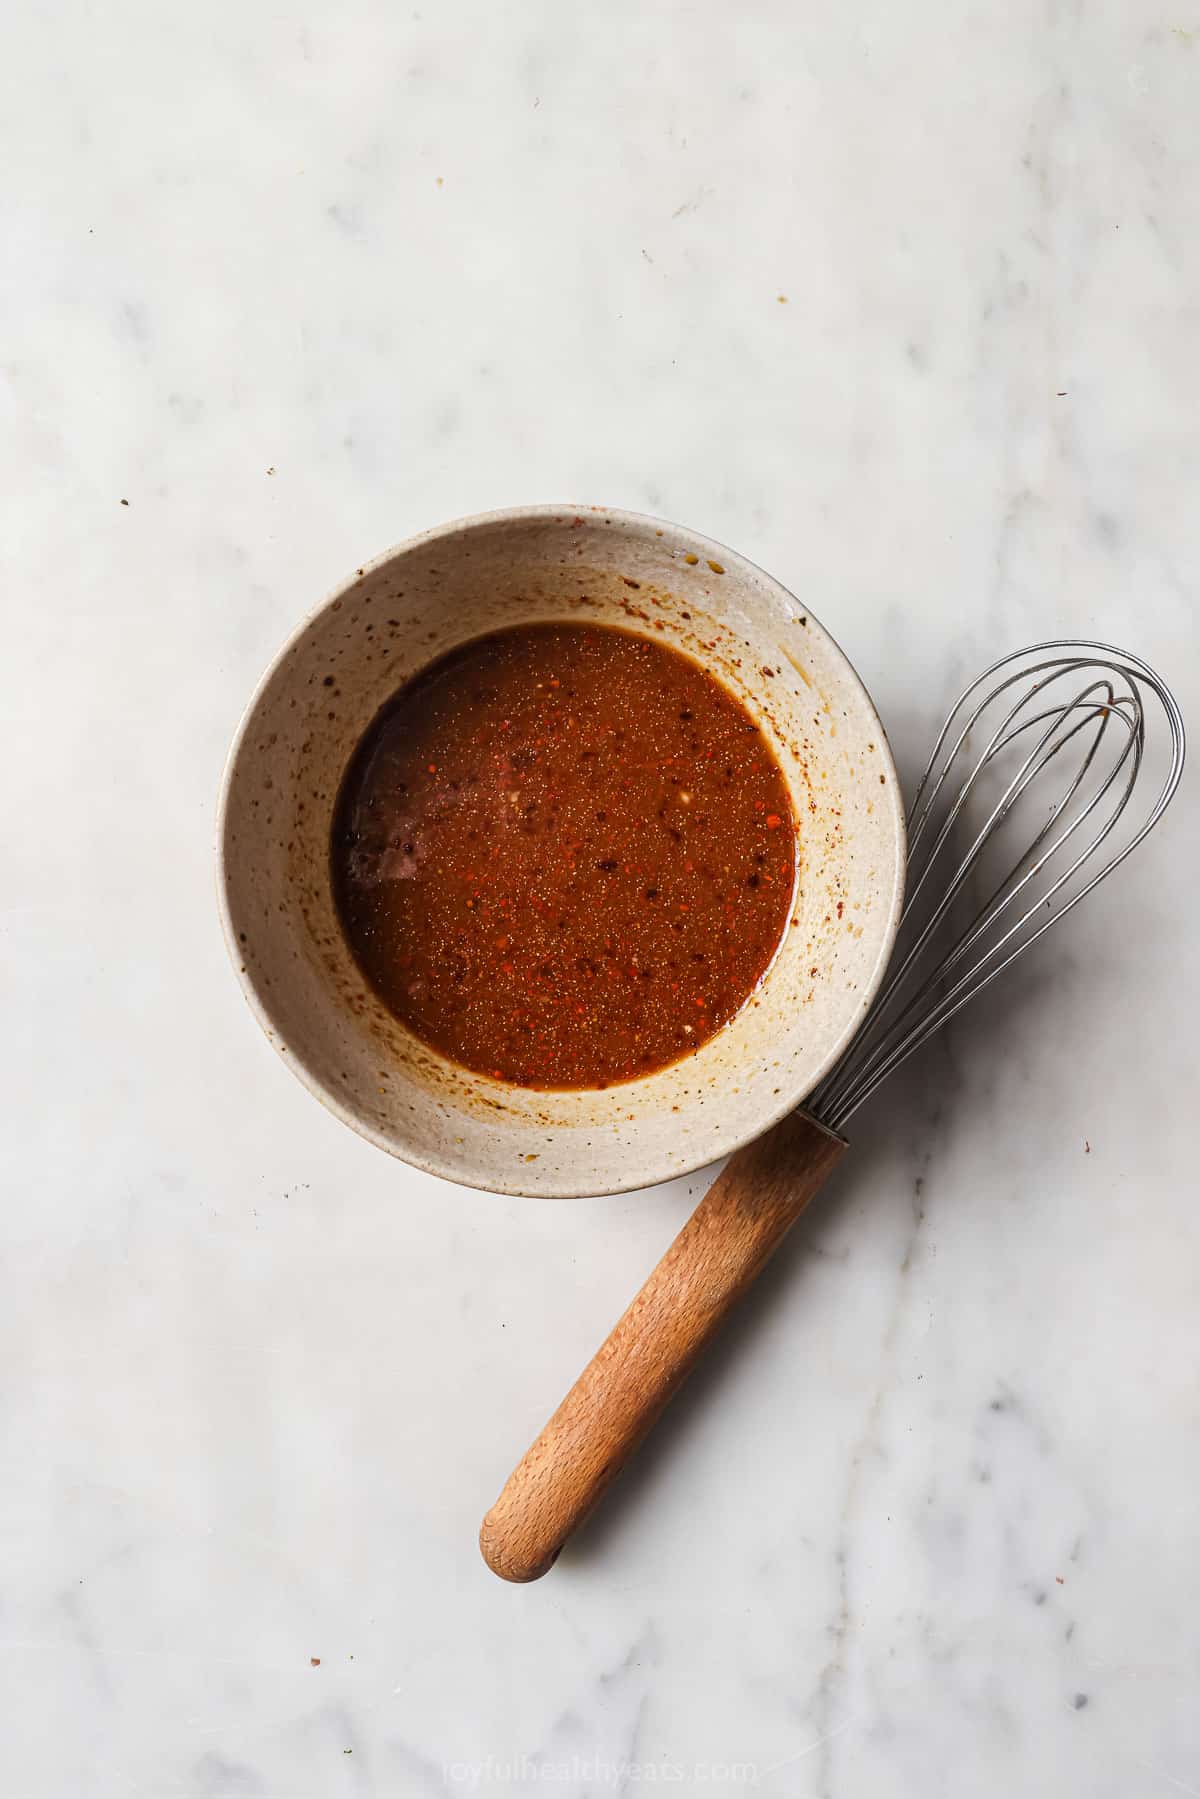 Sweet-and-،y sauce in a bowl. 